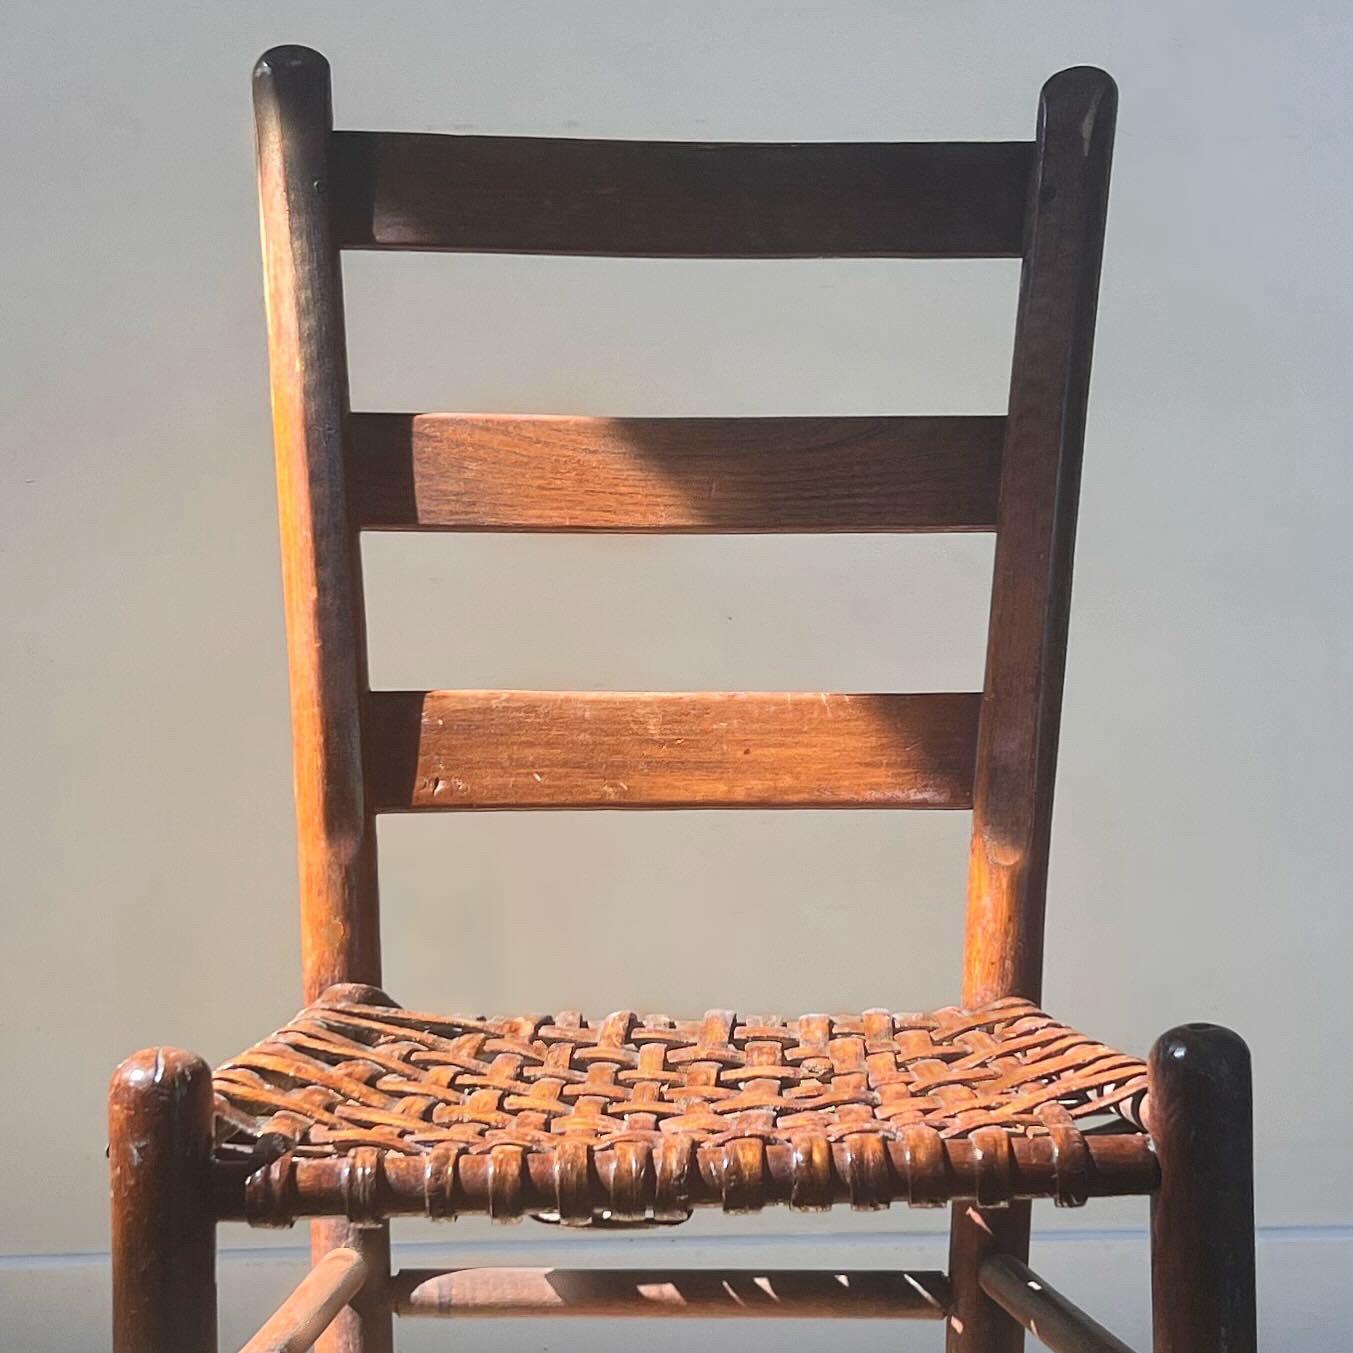 An antique wooden chair with braided seat, early 20th century. A wonderful little example of the early American craftsman movement. Signs of wear include scuffing but overall this chair is in fabulous condition for its age. Pick up in central west